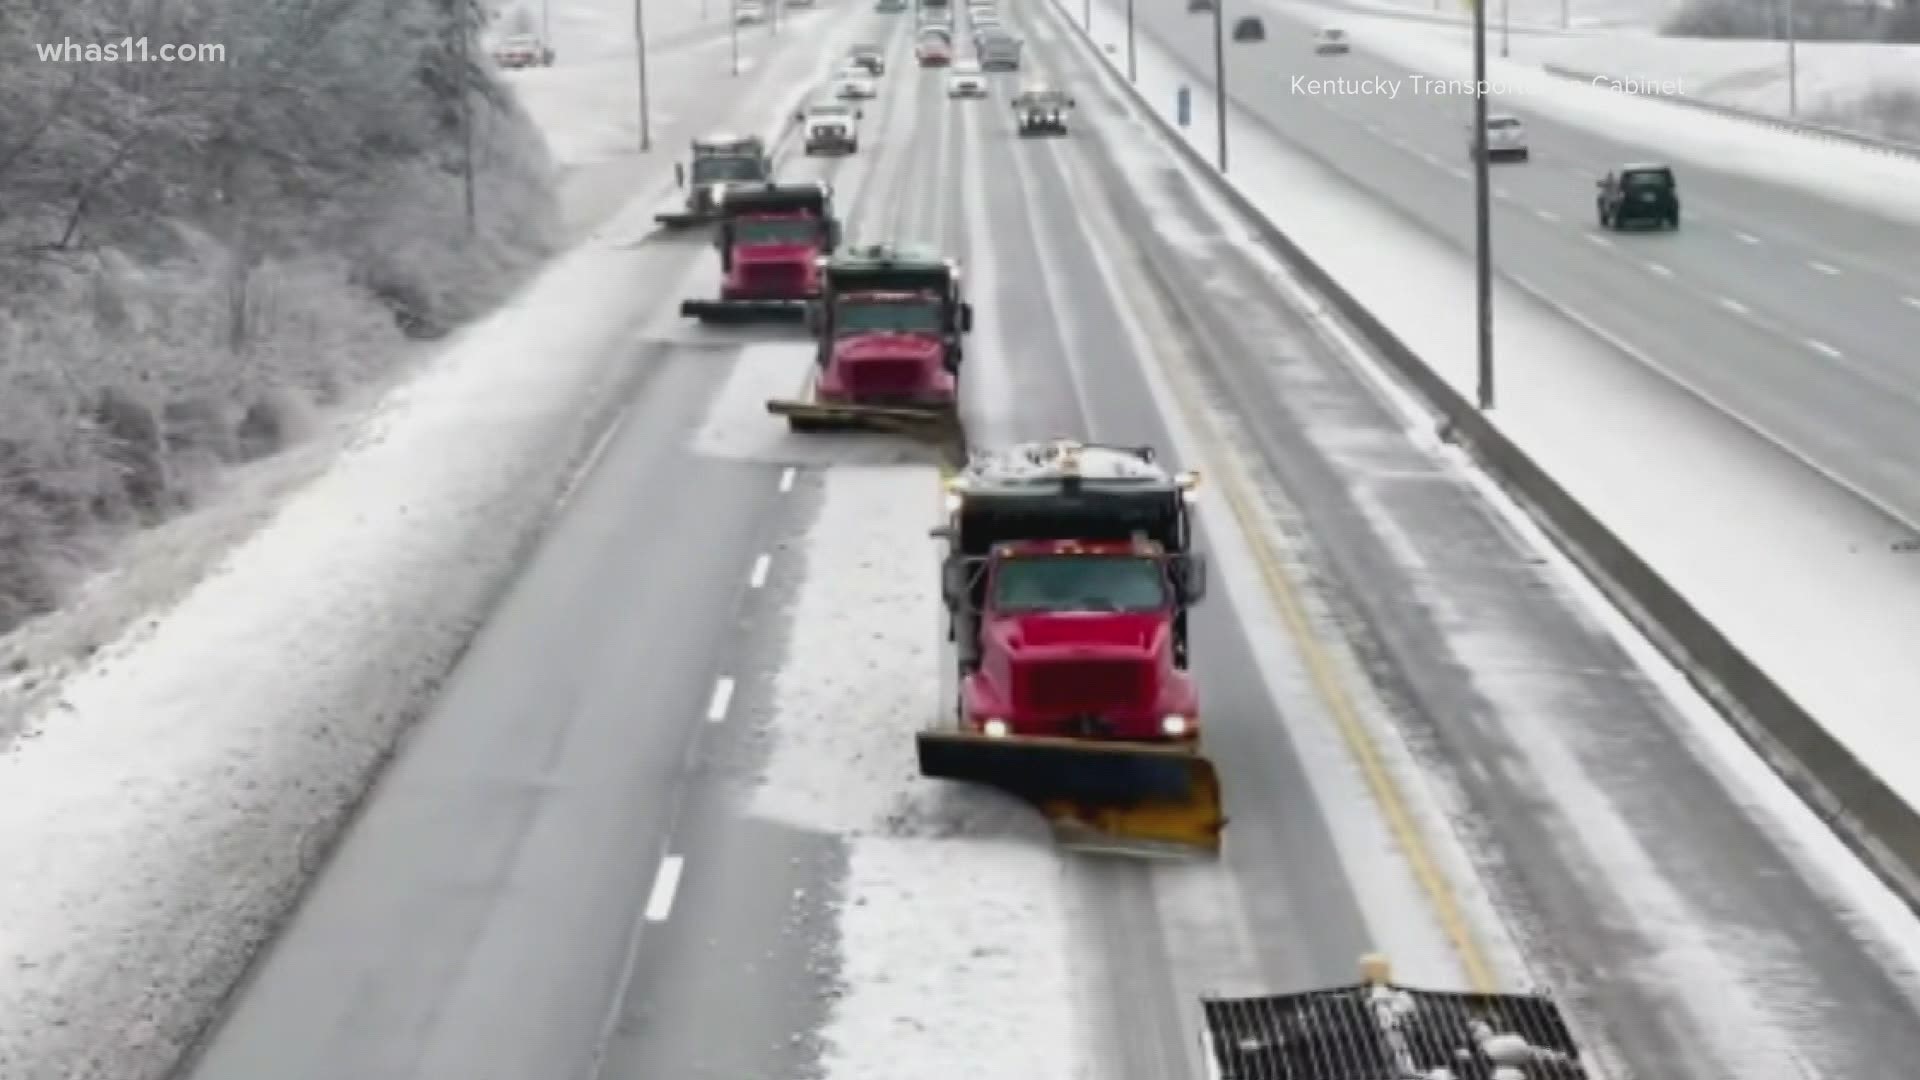 Check Kentucky road conditions during snow, winter storm